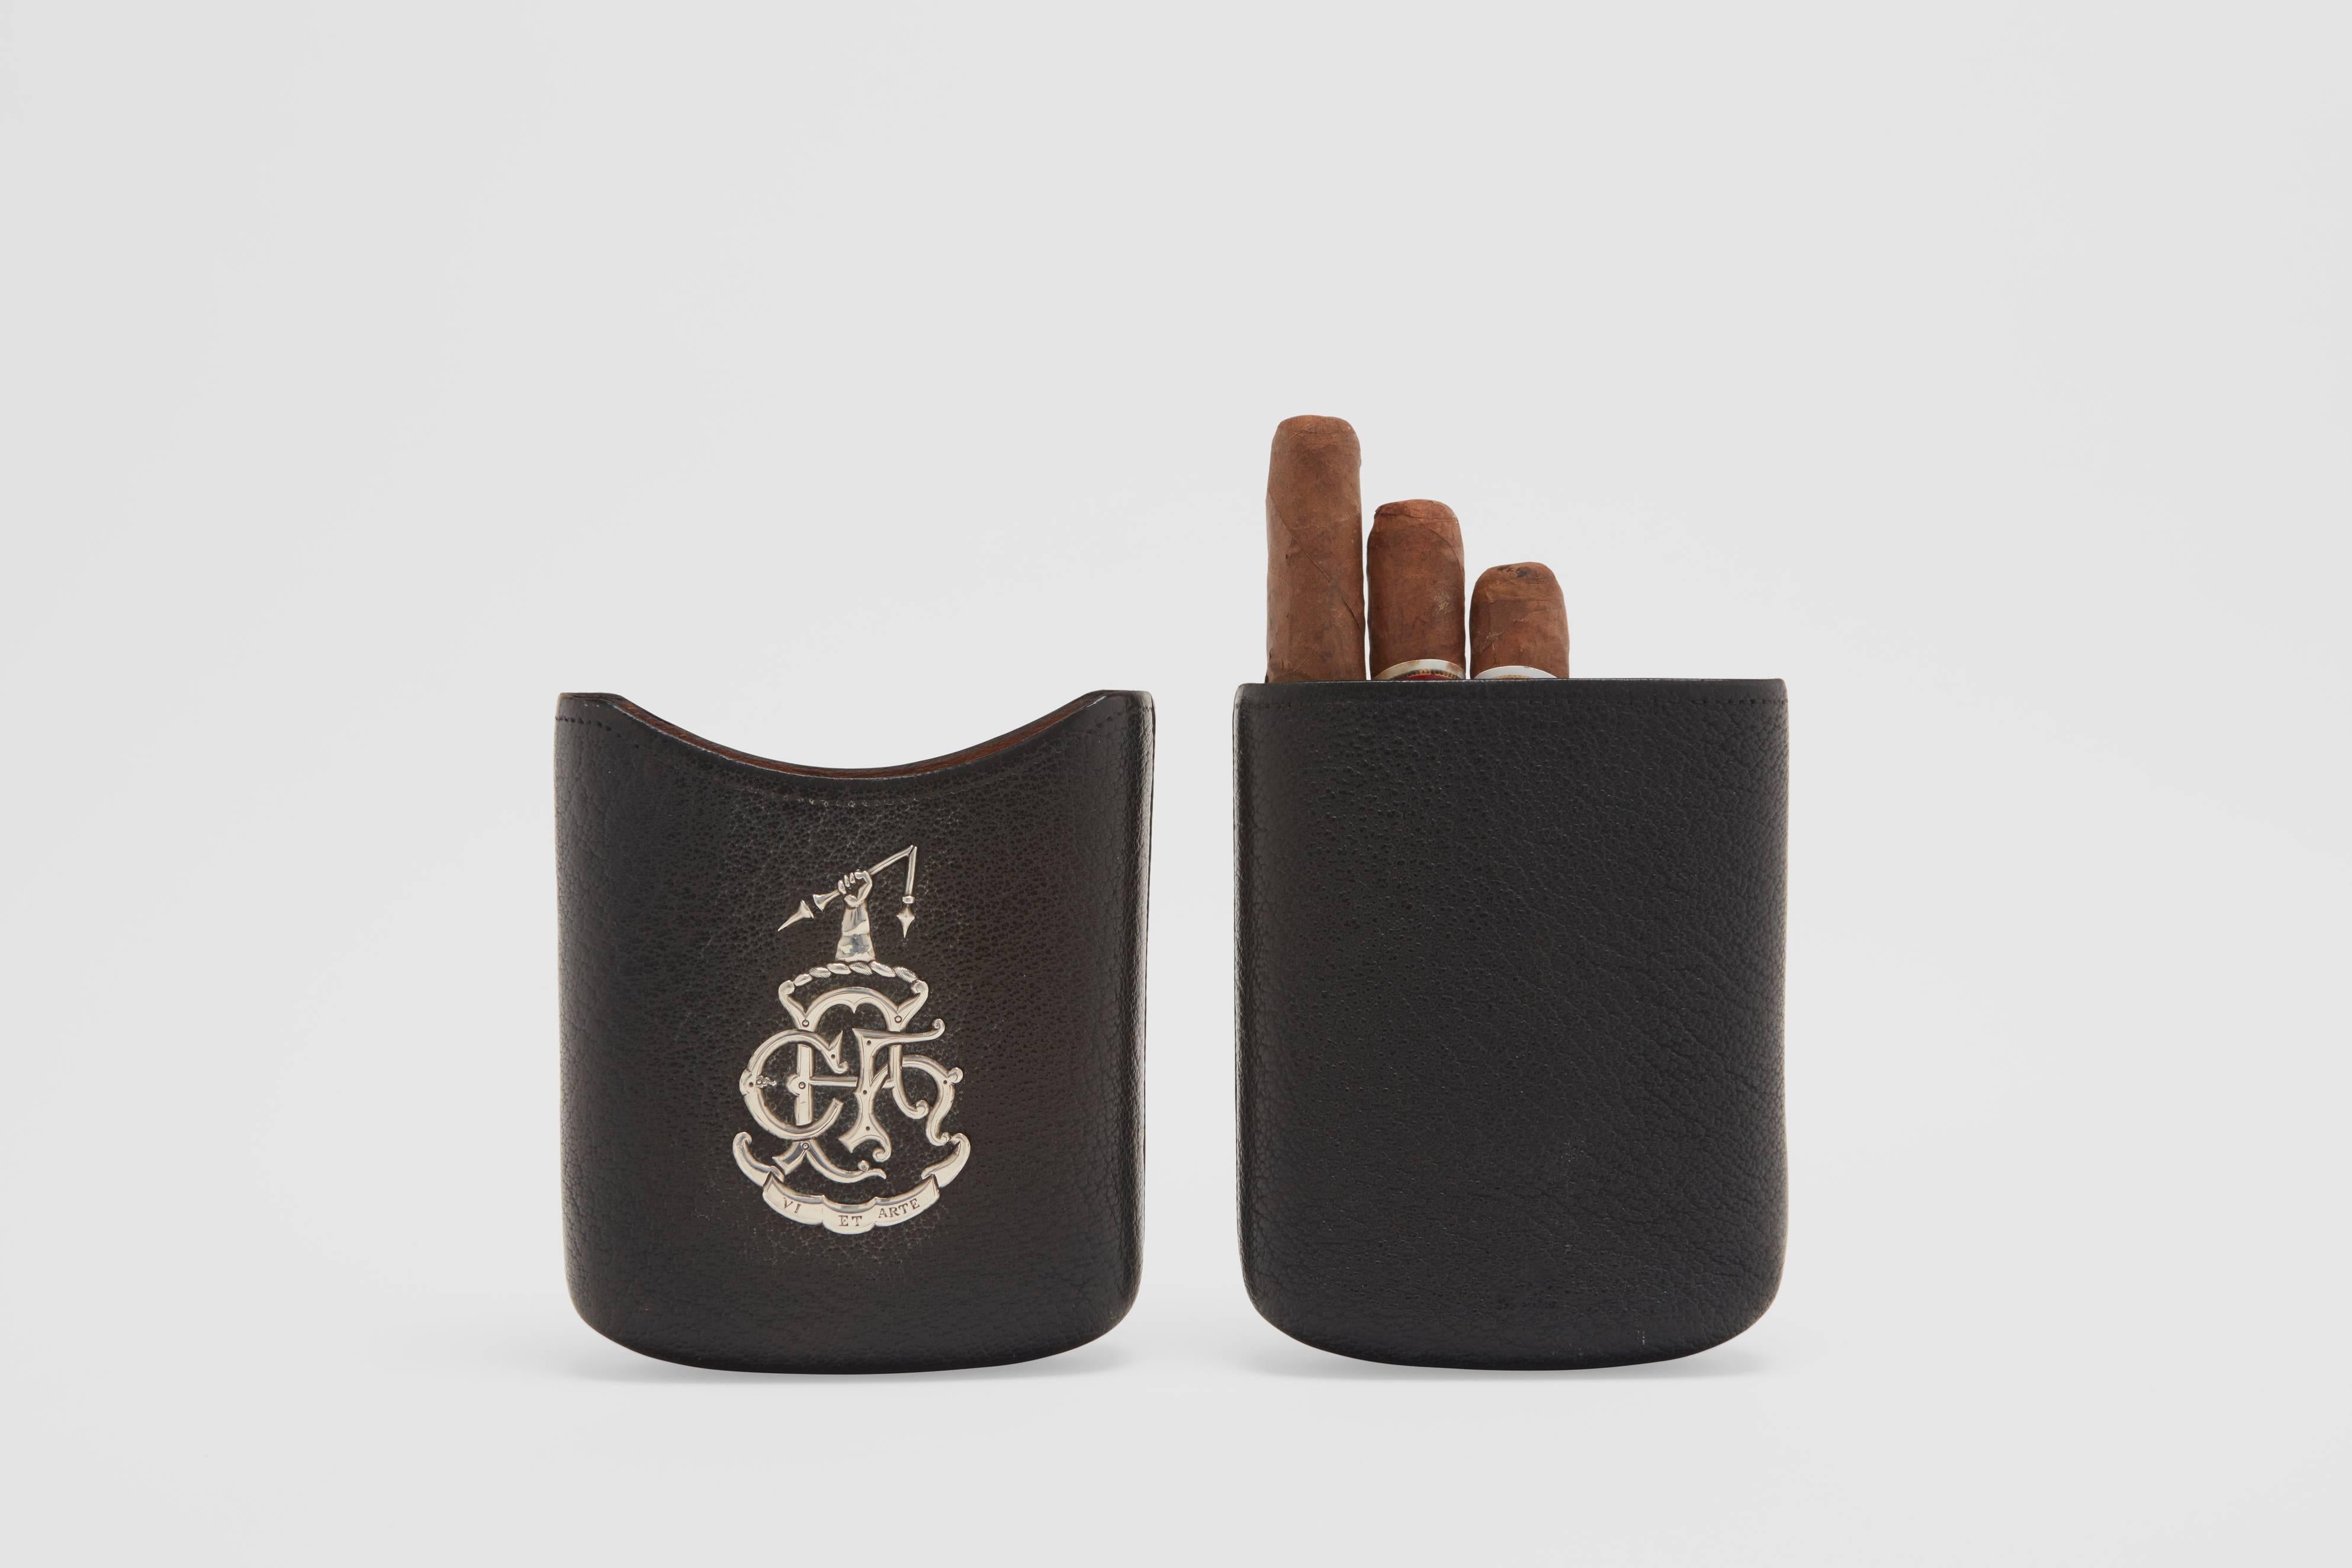 A leather and sterling silver cigar pouch.  This great looking travel pouch is set with a stunning family crest on the front.  There is a Latin inscription to the base of the crest; "Via et Arte".  This translates to "By Strength and